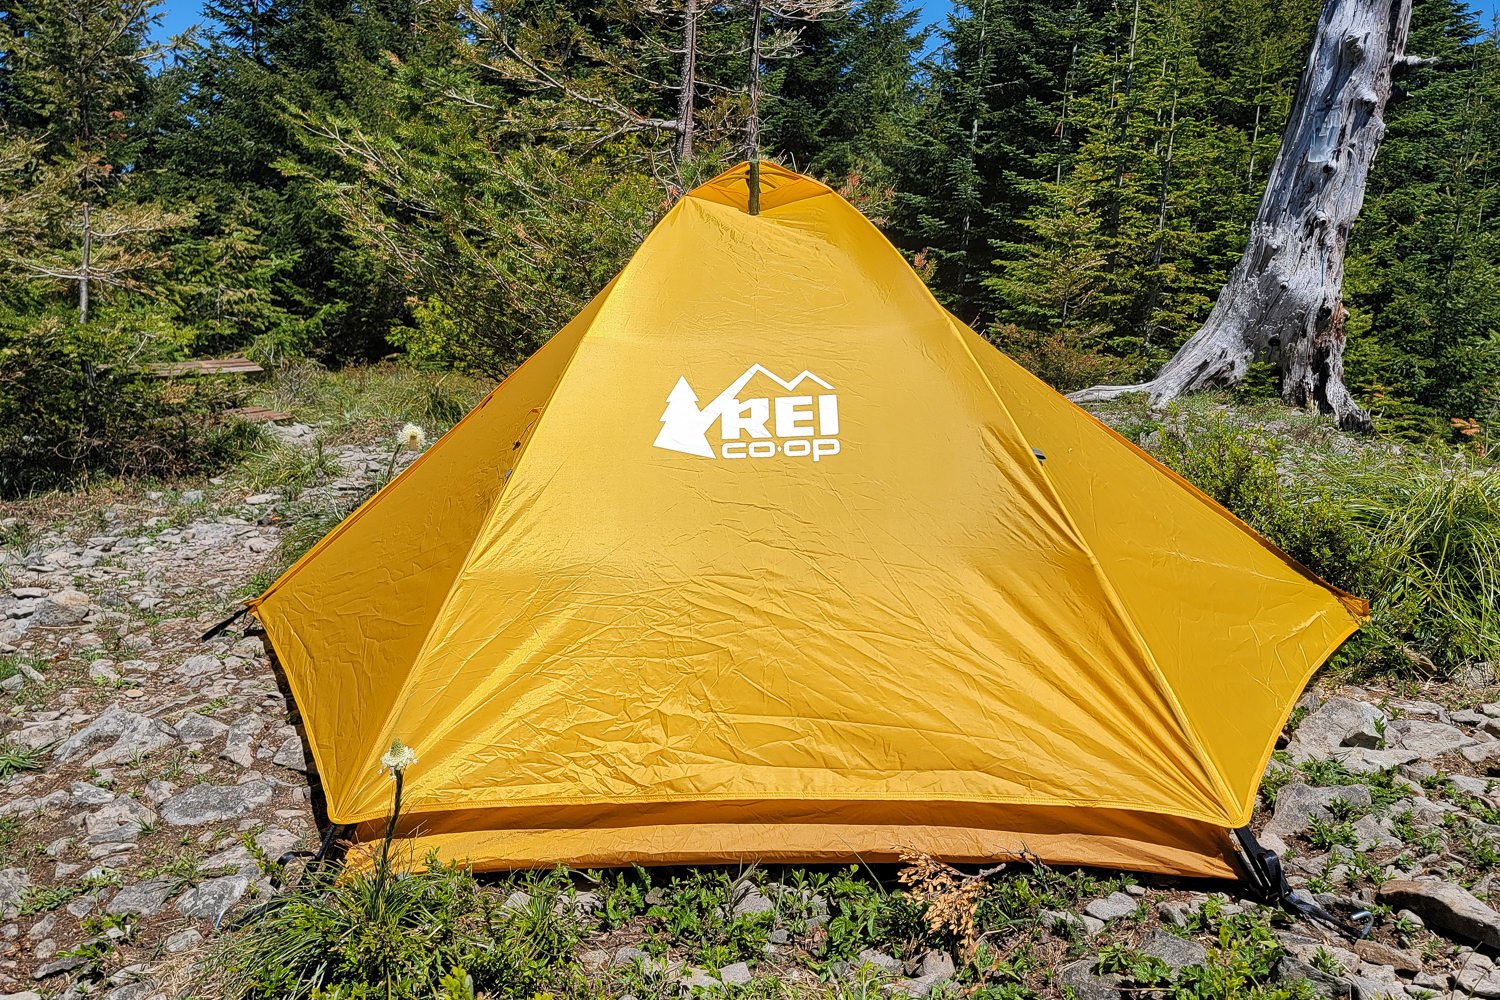 A side view of the REI Trailmade 2 tent with the rain fly on